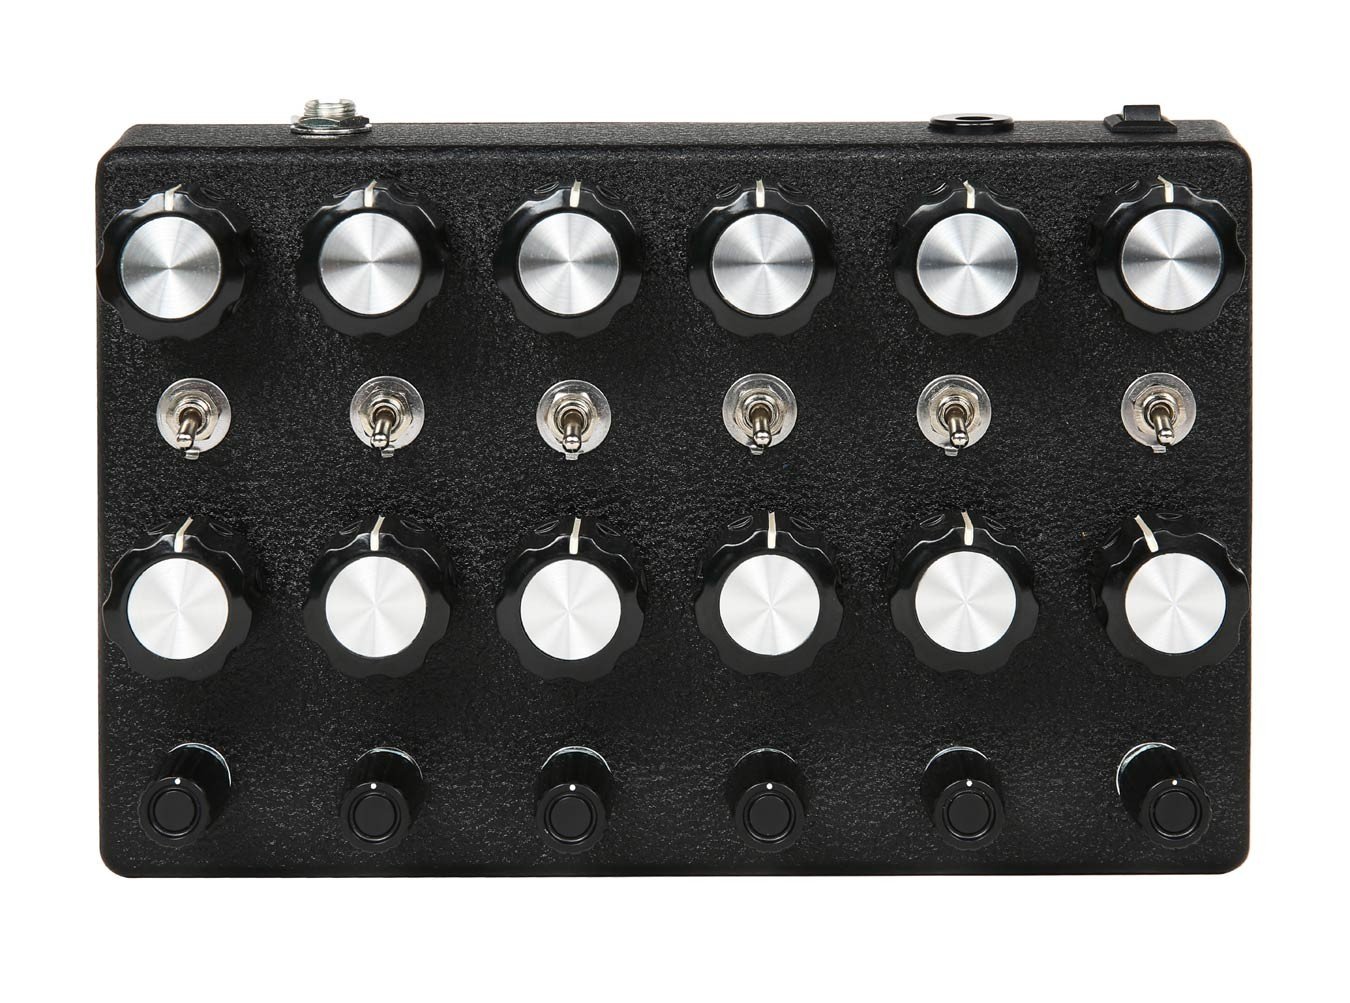 NOSC-12 Drone Synth